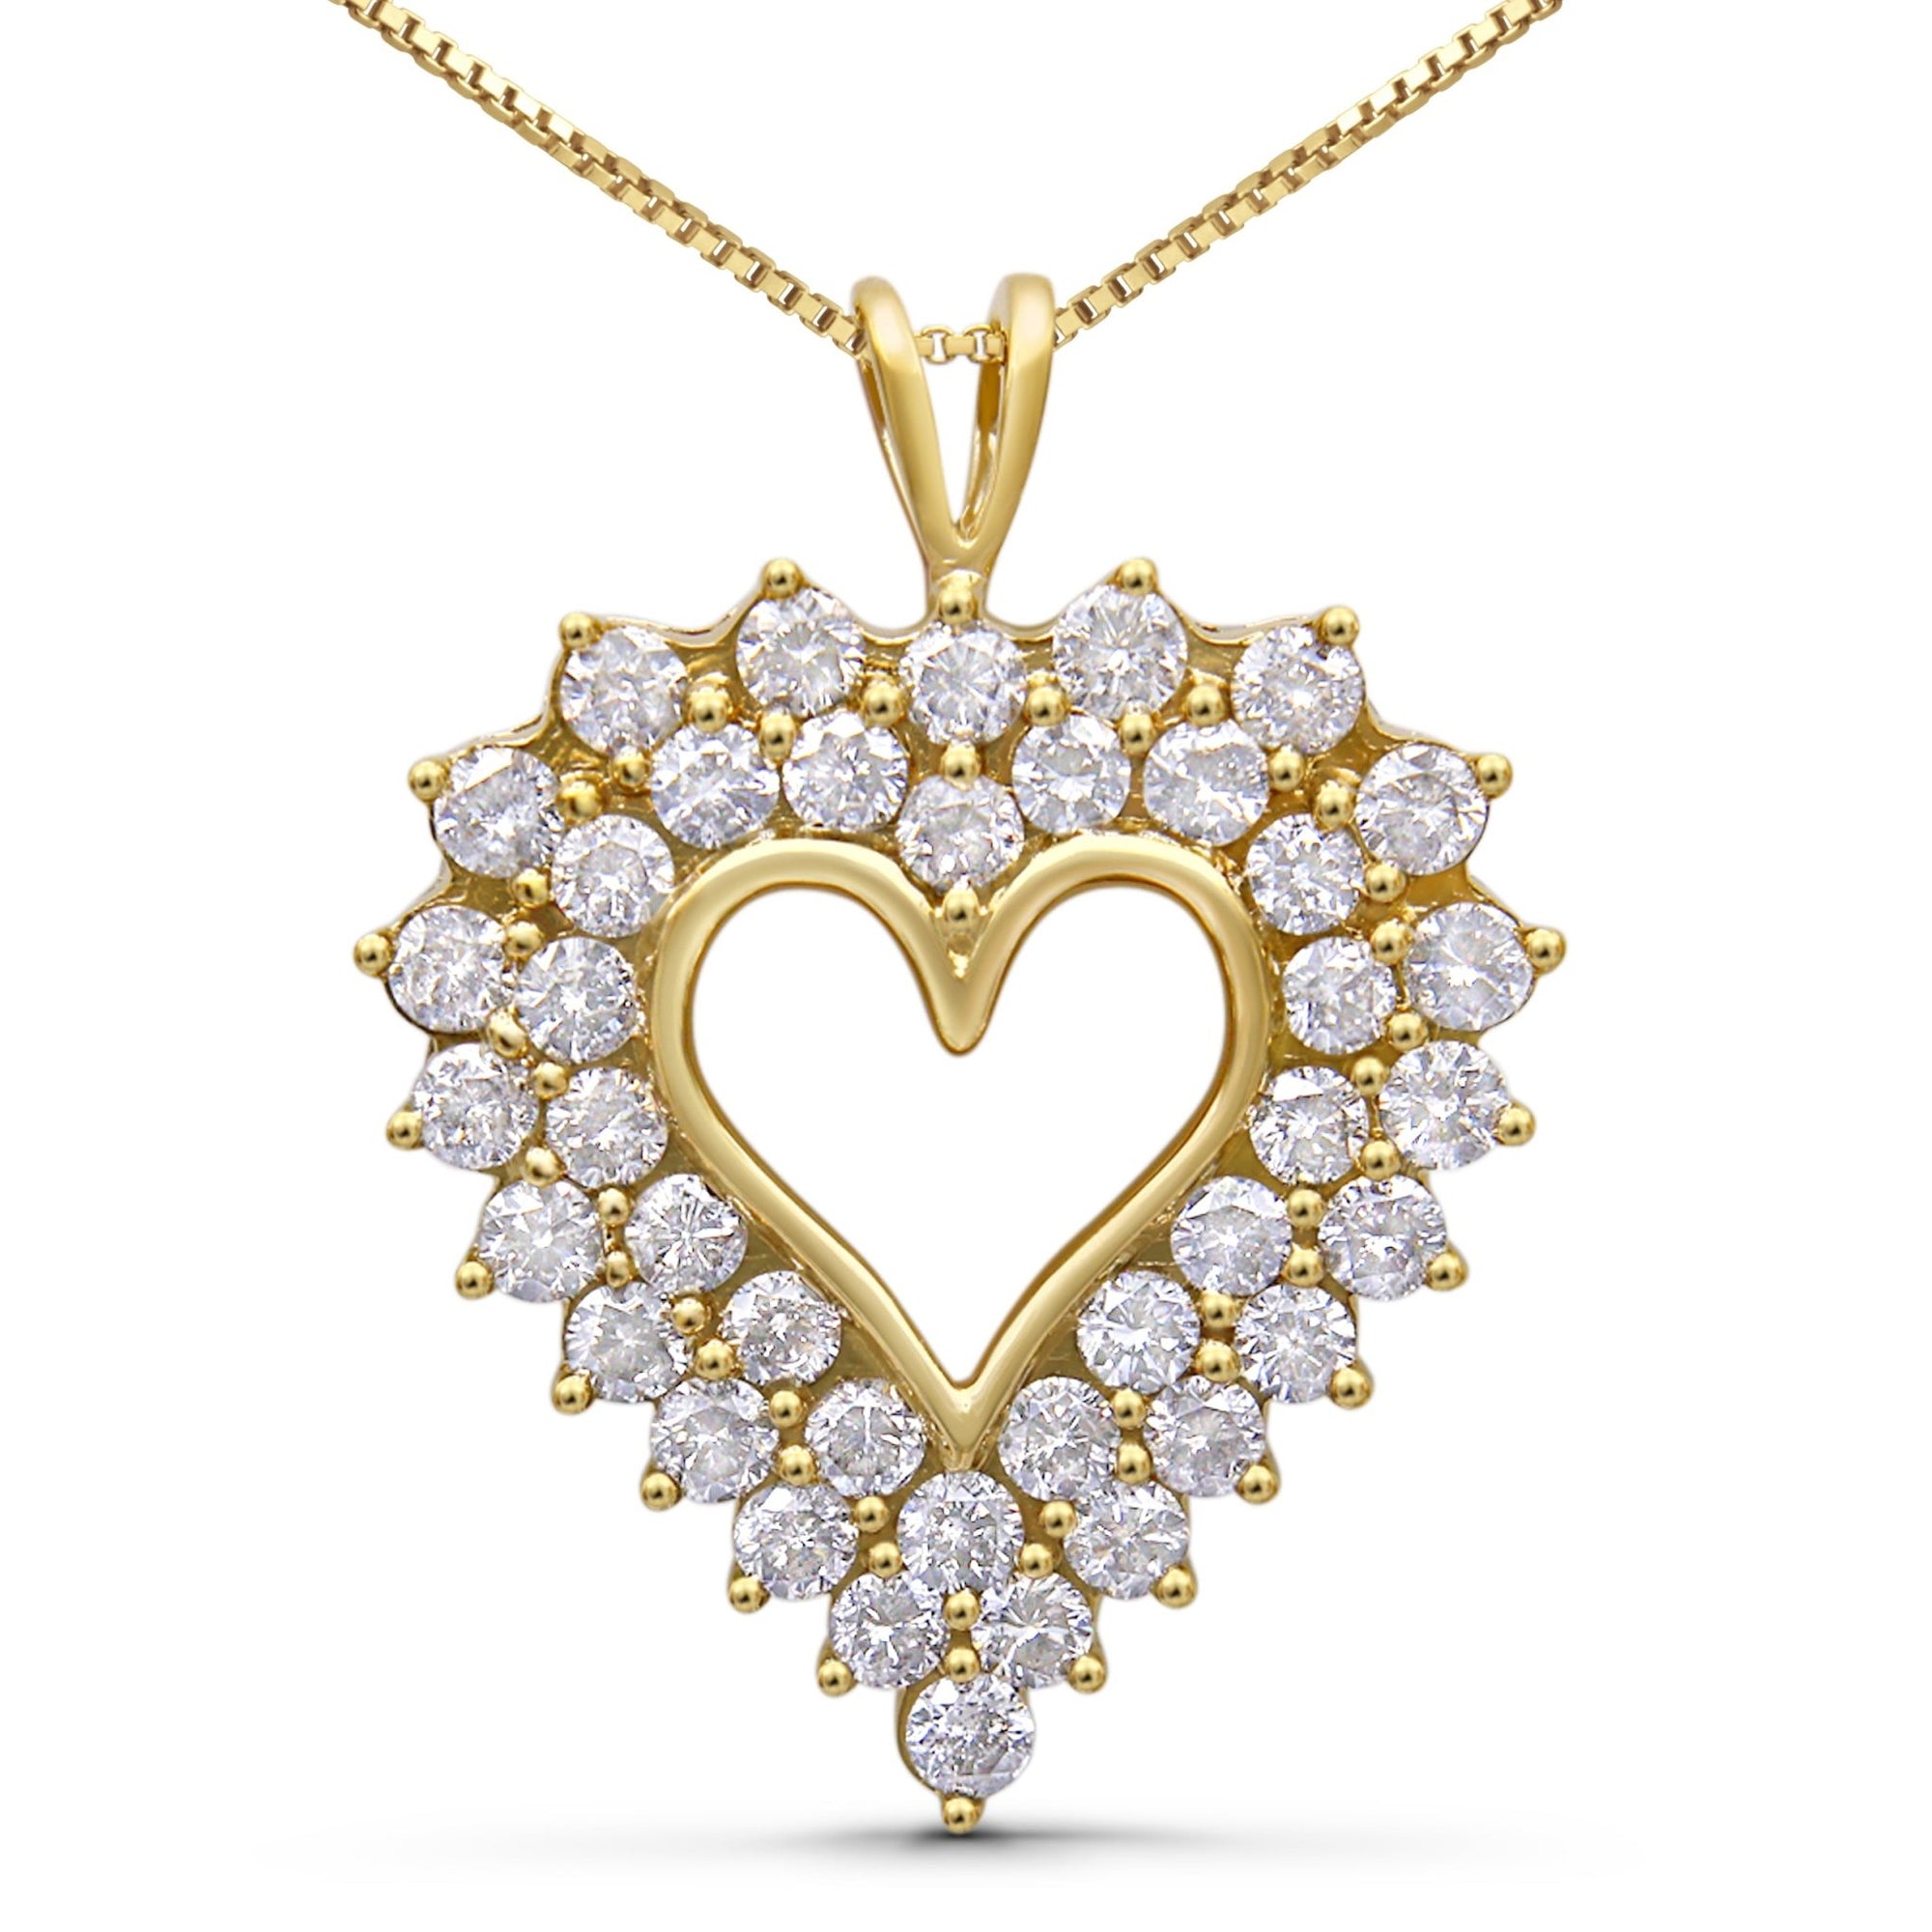 14K Yellow Gold Plated .925 Sterling Silver 4.0 Cttw Diamond Shadow Frame Heart 18" Pendant Necklace (J-K Color, I1-I2 Clarity) - LinkagejewelrydesignLinkagejewelrydesign